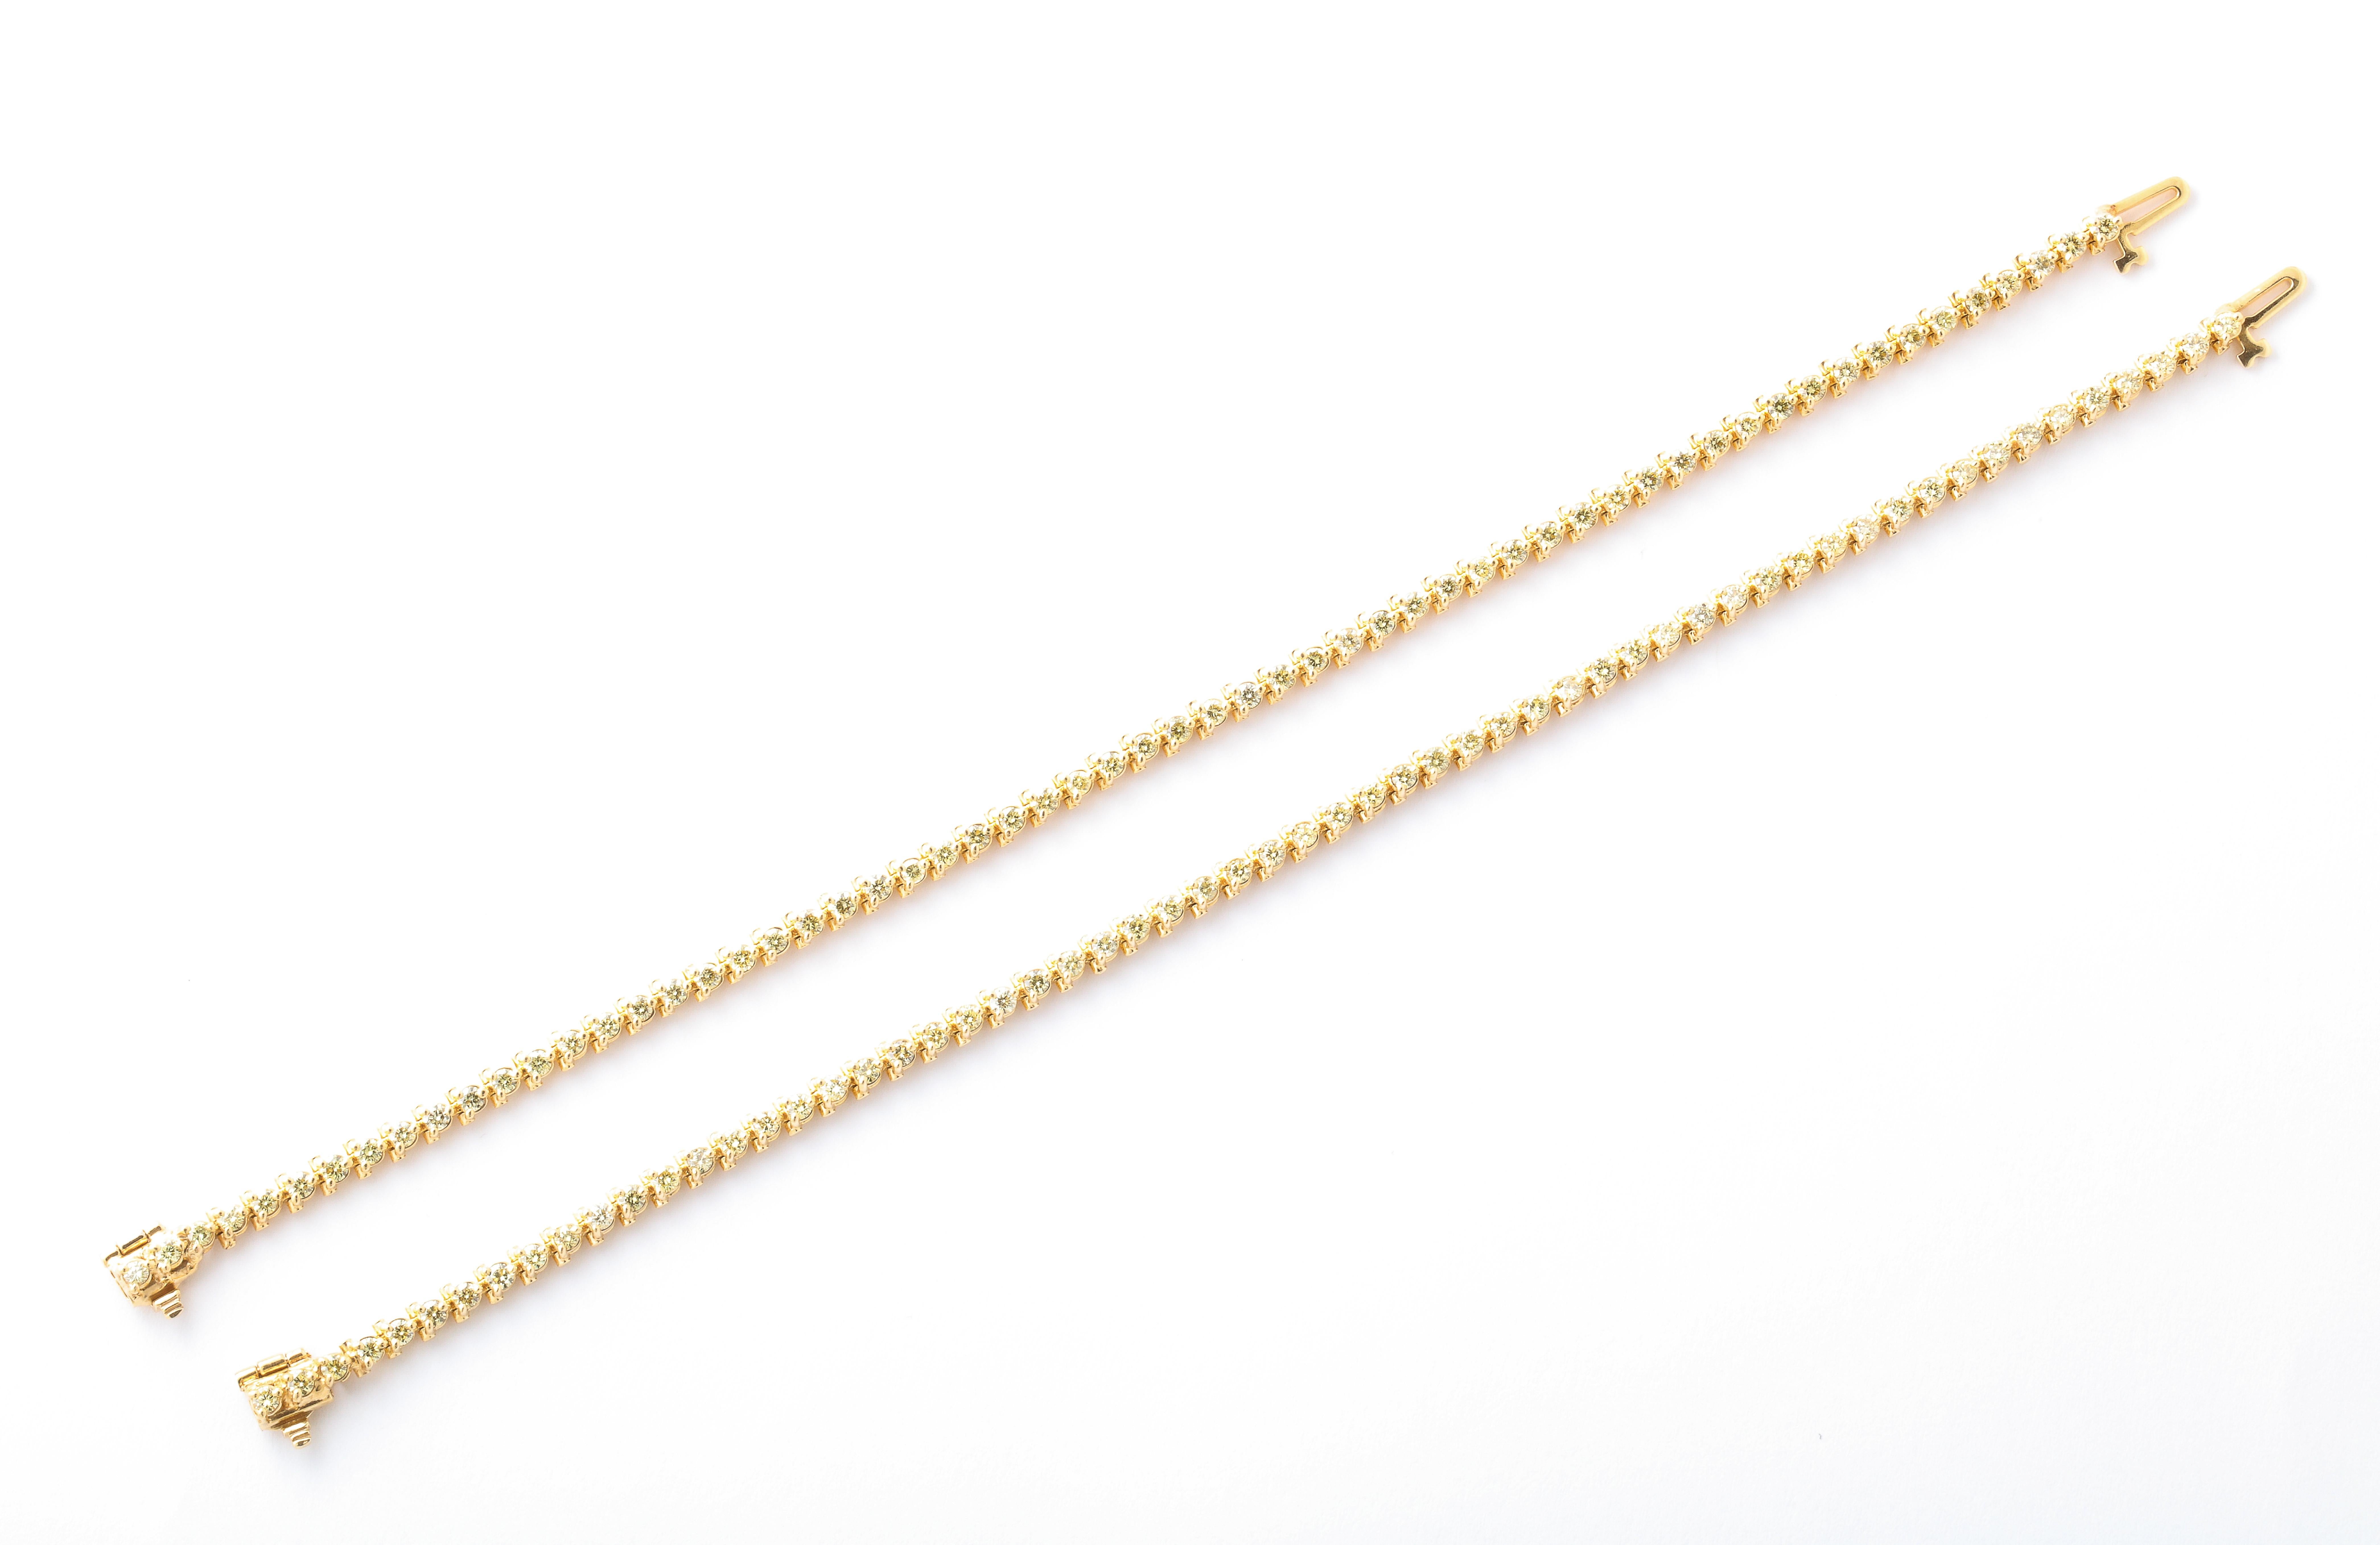 
A pair of matching yellow diamond tennis bracelets - PERFECT for stacking! 

Each bracelet is set with 2.90 carats of round yellow diamonds for a total of 5.80 carats of diamonds set in 14k yellow gold. 

7 inch length 

A wonderful gift! 